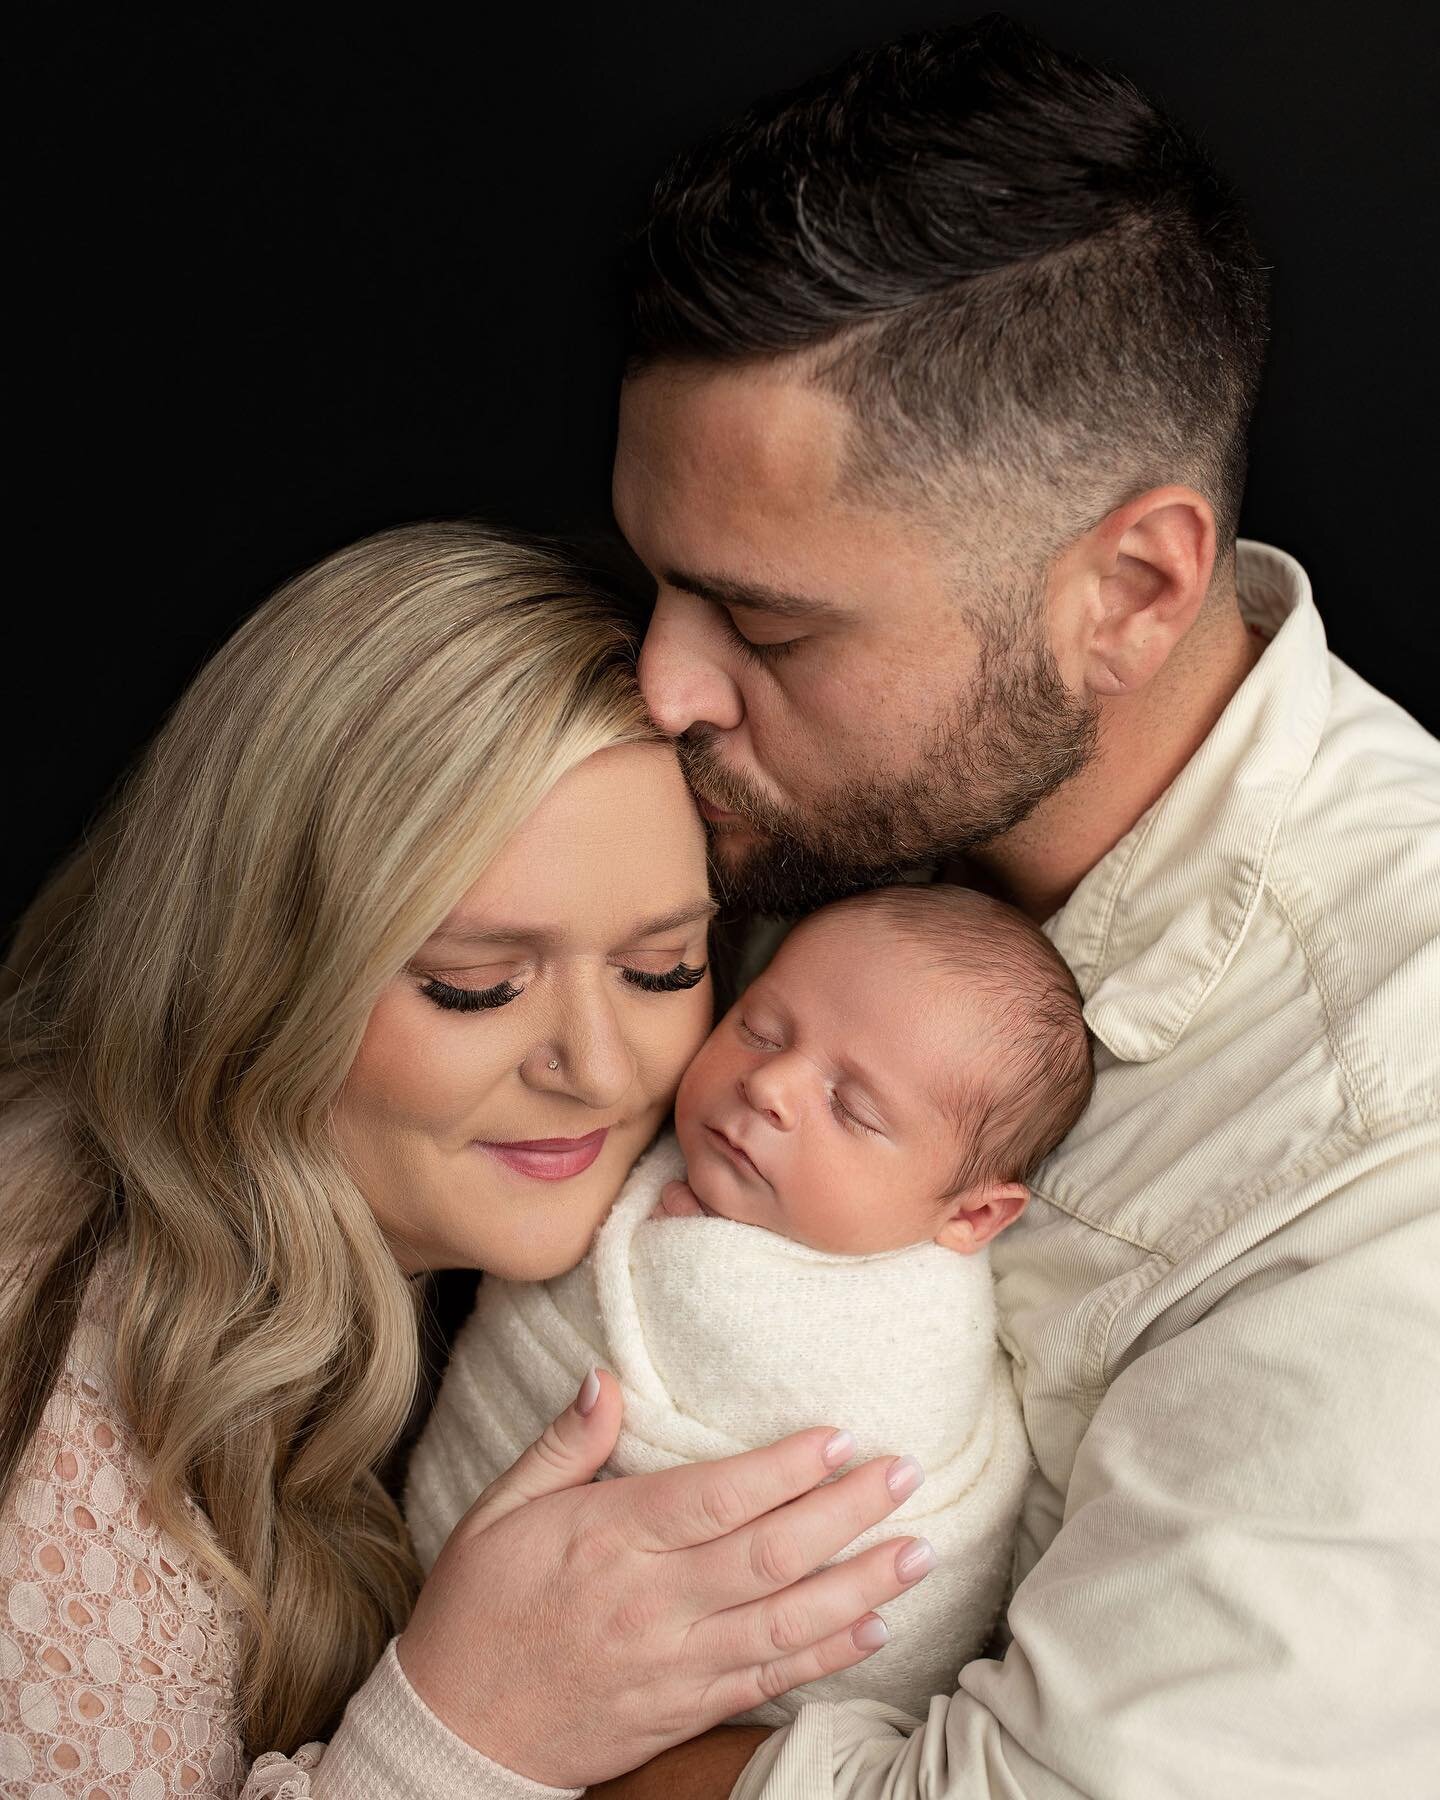 The love of a family is life&rsquo;s greatest blessing &hearts;️

Did you know all Newborn Portrait Sessions include multiple family poses and individual parent poses with baby at no additional charge? This is such an incredibly special time in your 